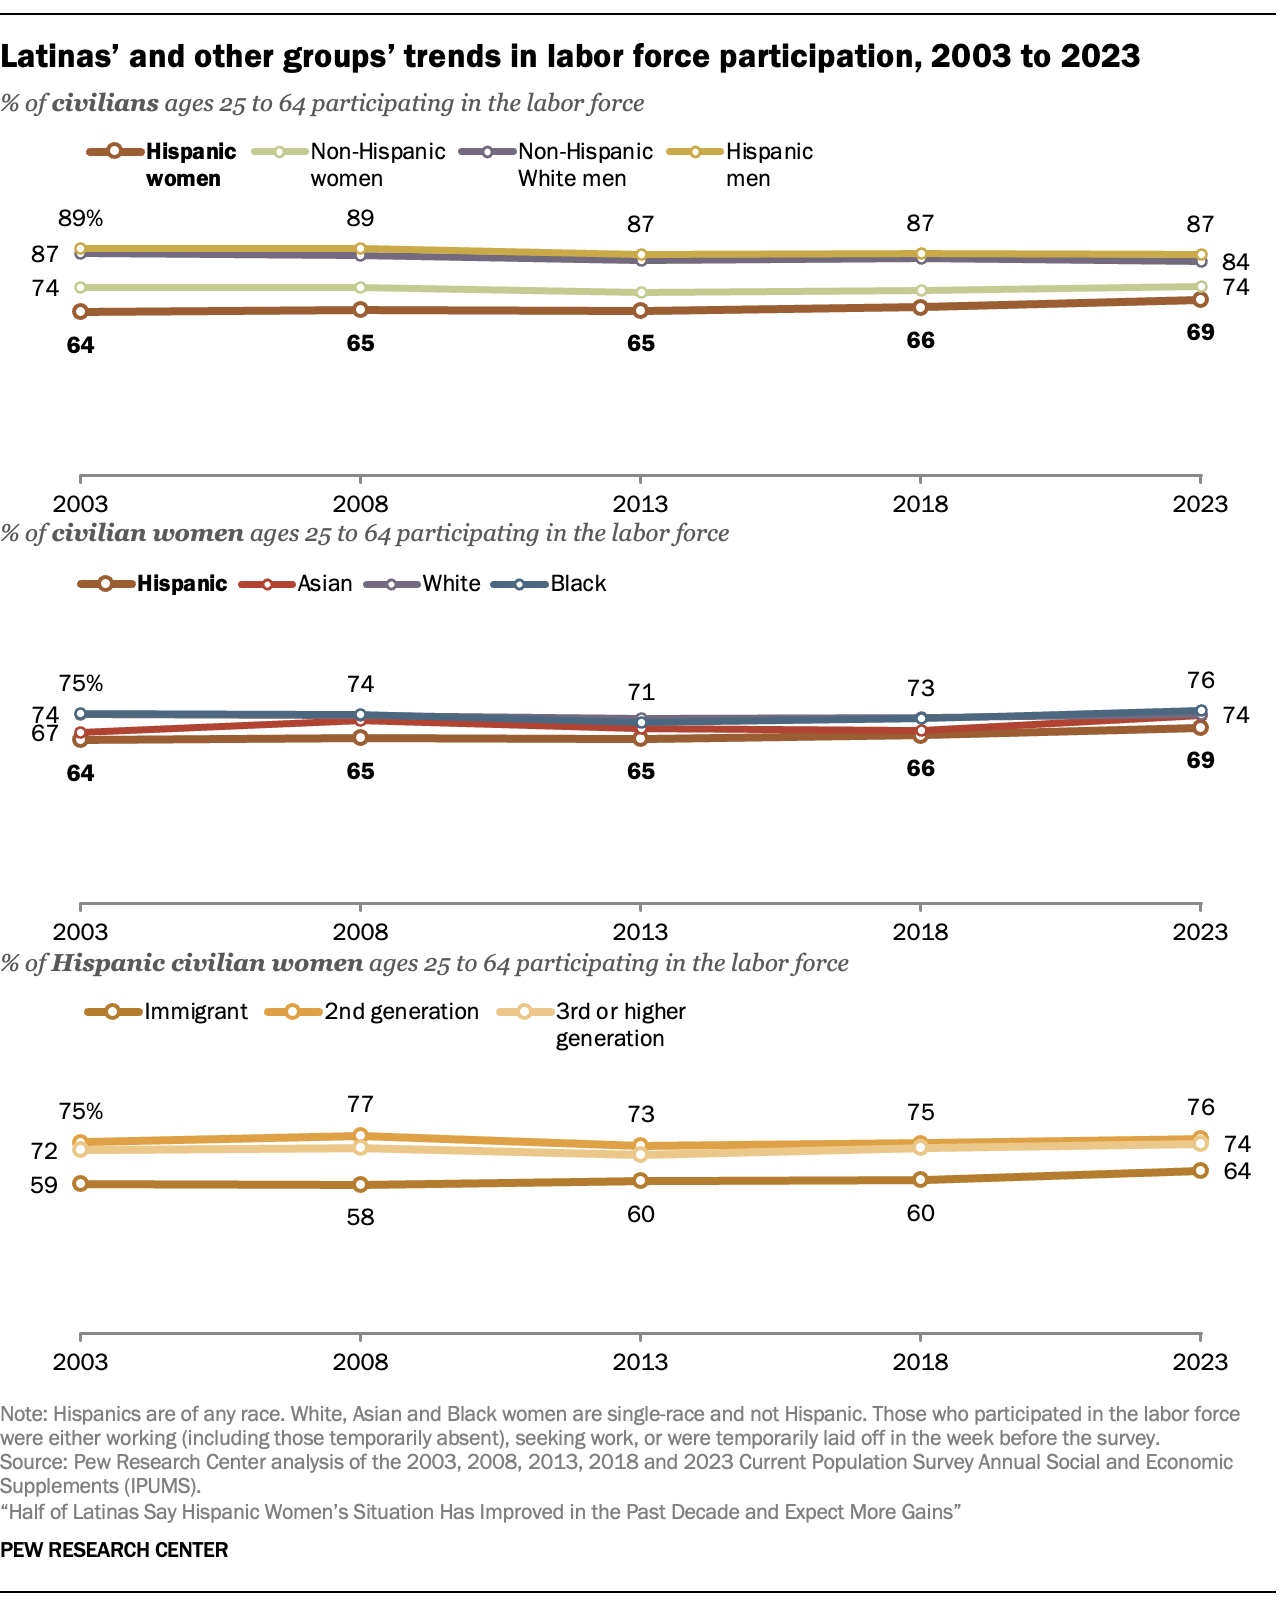 A series of line graphs showing Latinas’ and other groups’ trends in labor force participation from 2003 to 2023.